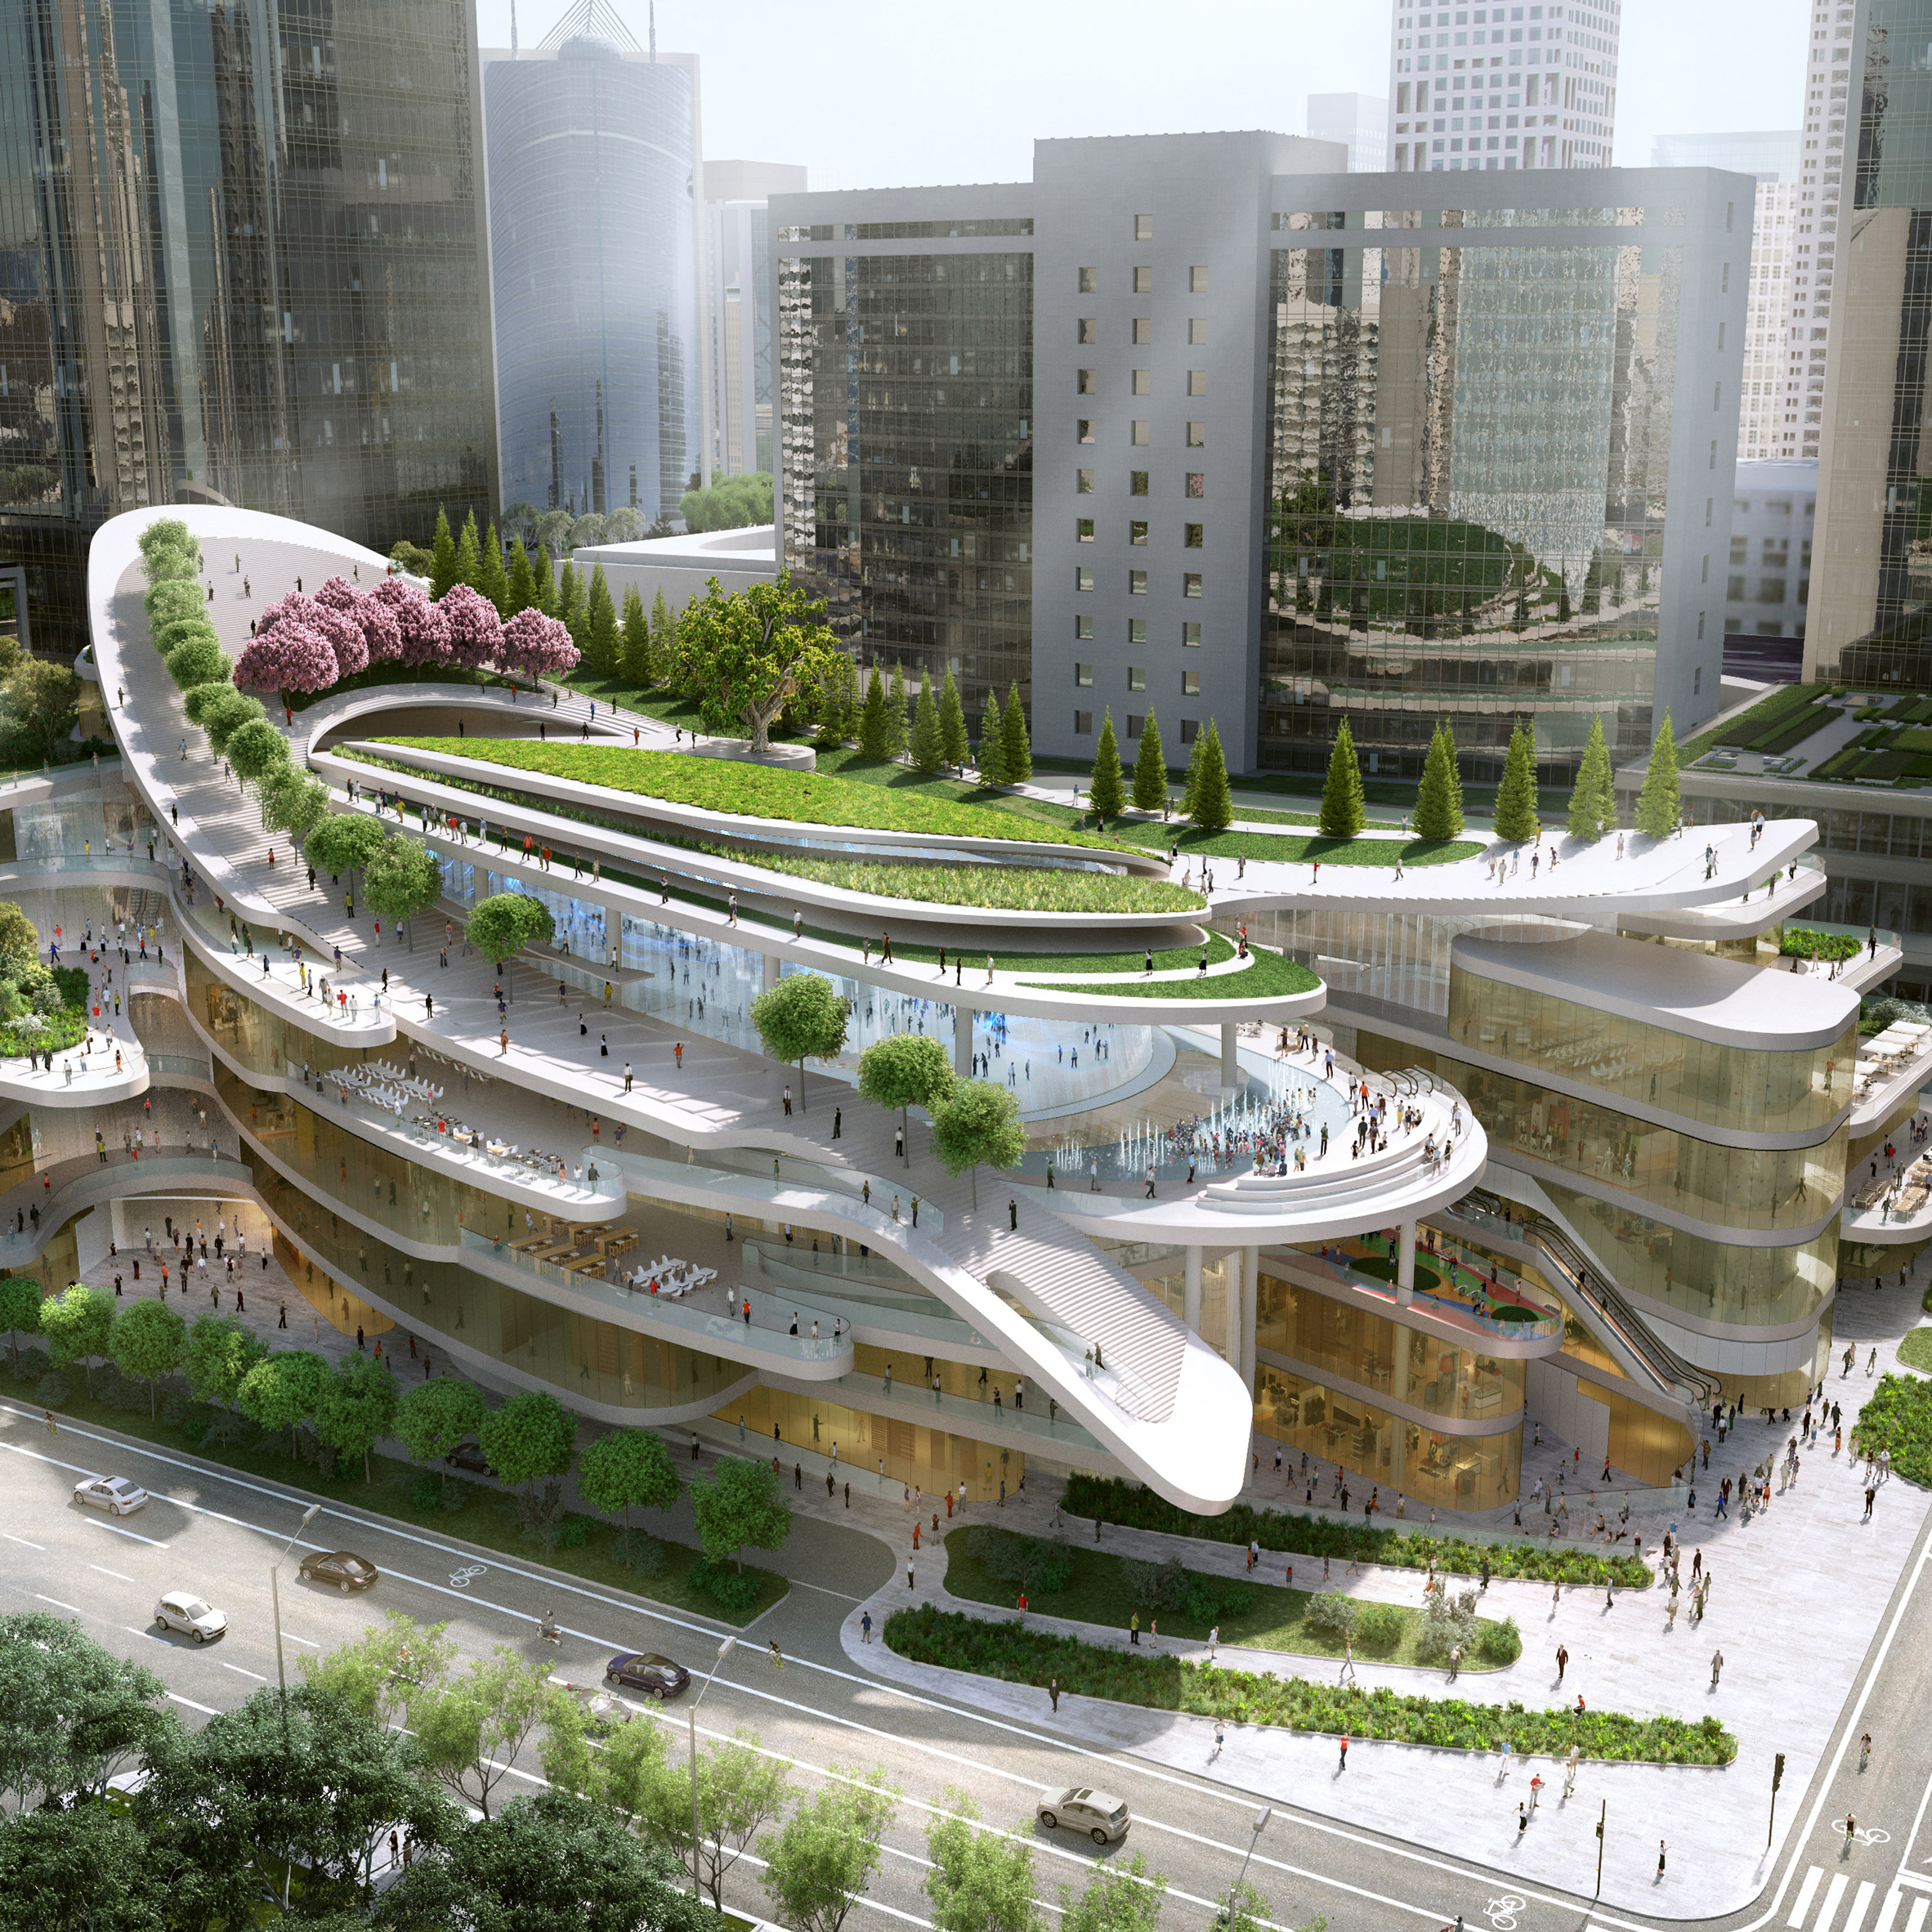 Project architect at Aedas in various locations across China